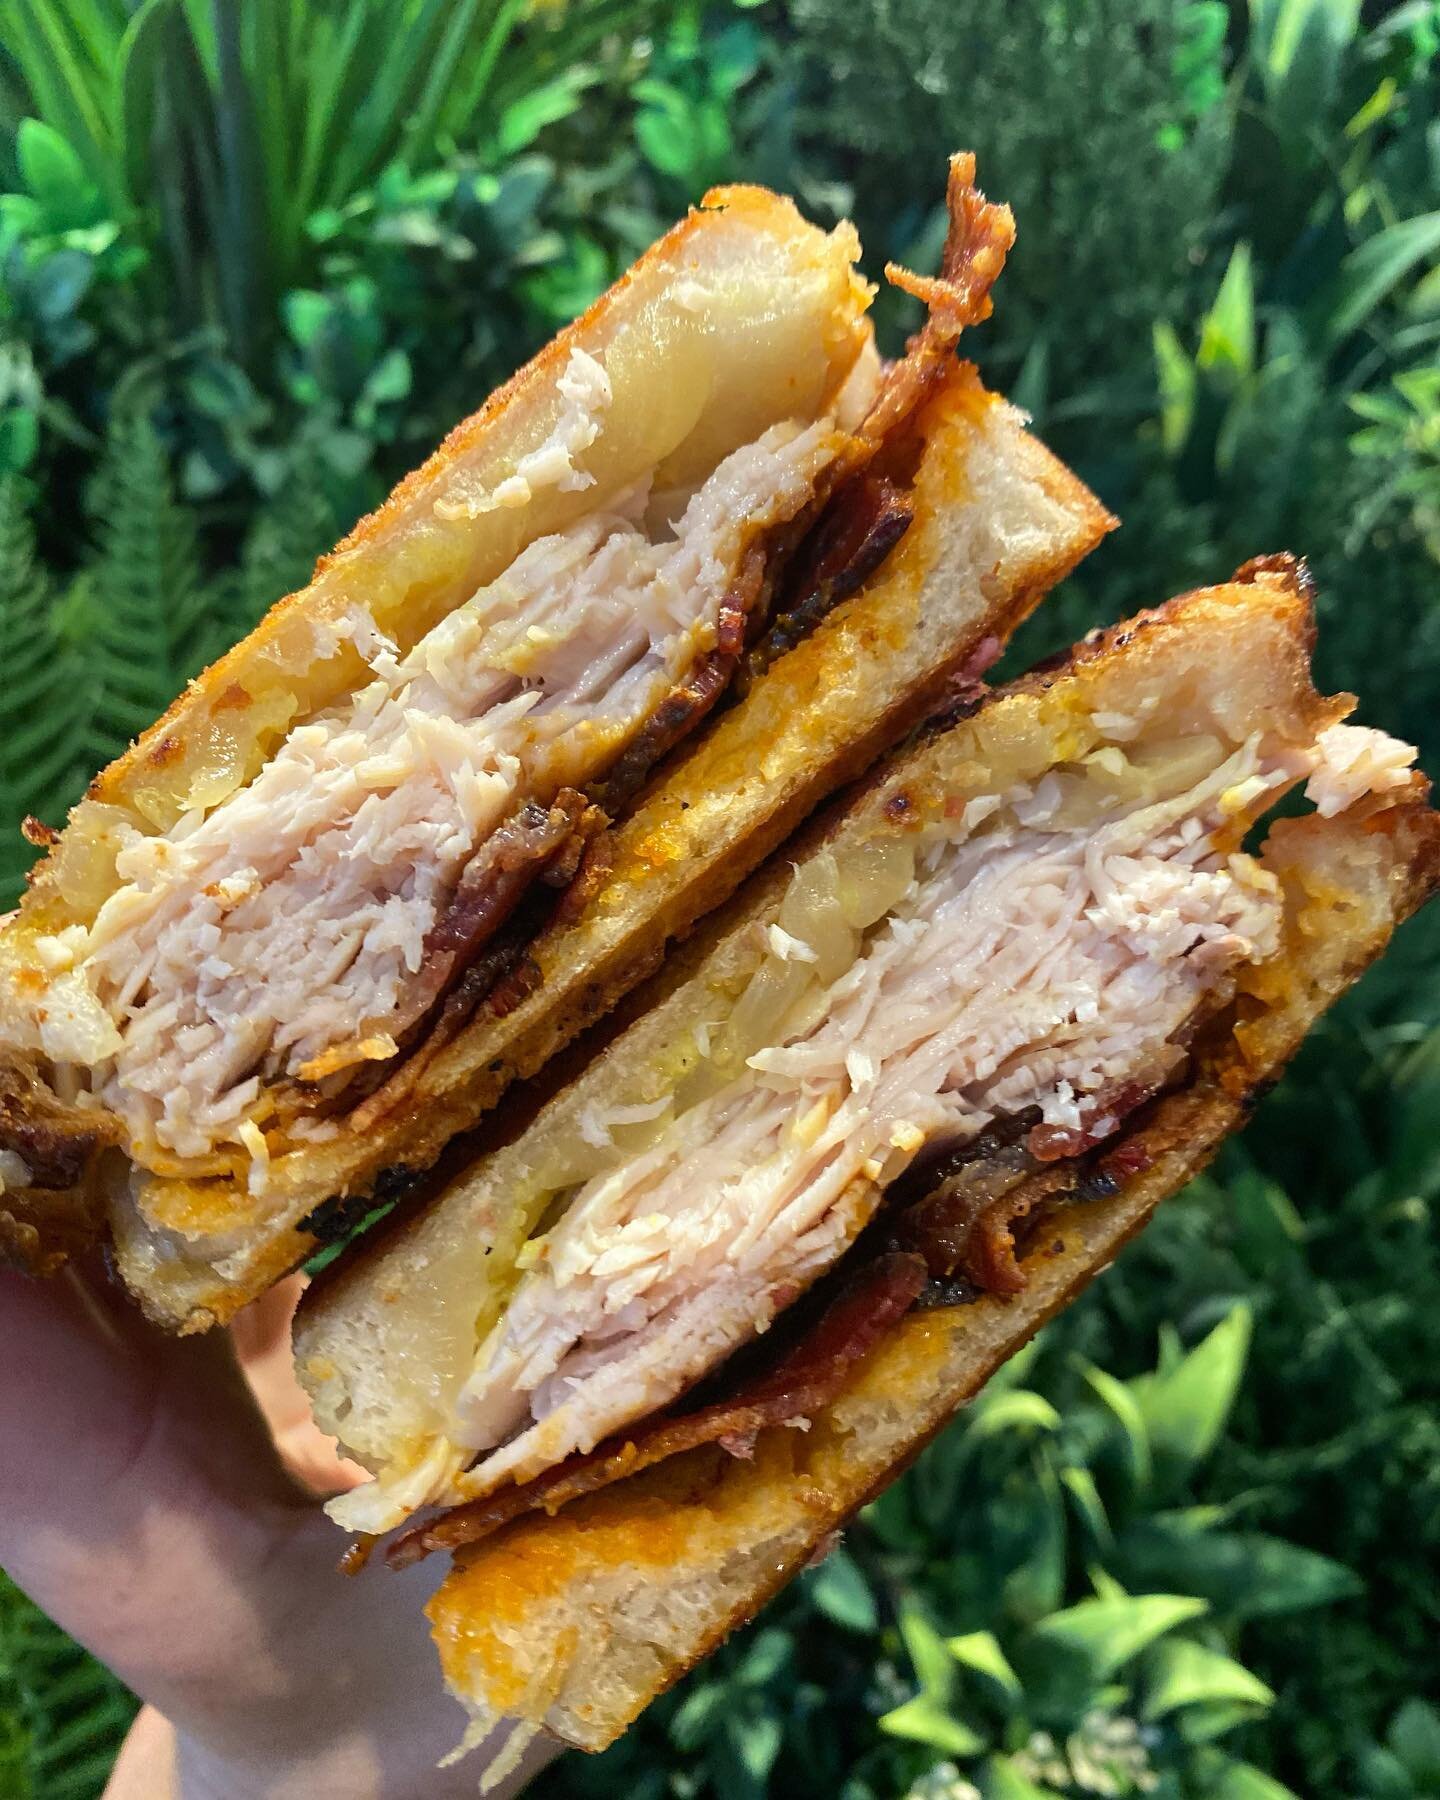 Twist my turkey and spank my bacon... The Turkey Twister is here 🌪️ with our house made BBQ 🤤
👉🏼Another new addition to our lunch menu served Tuesday - Sunday until 4pm. 

🌪️ turkey, bacon, caramelized onions, yellow mustard, house BBQ sauce, sw